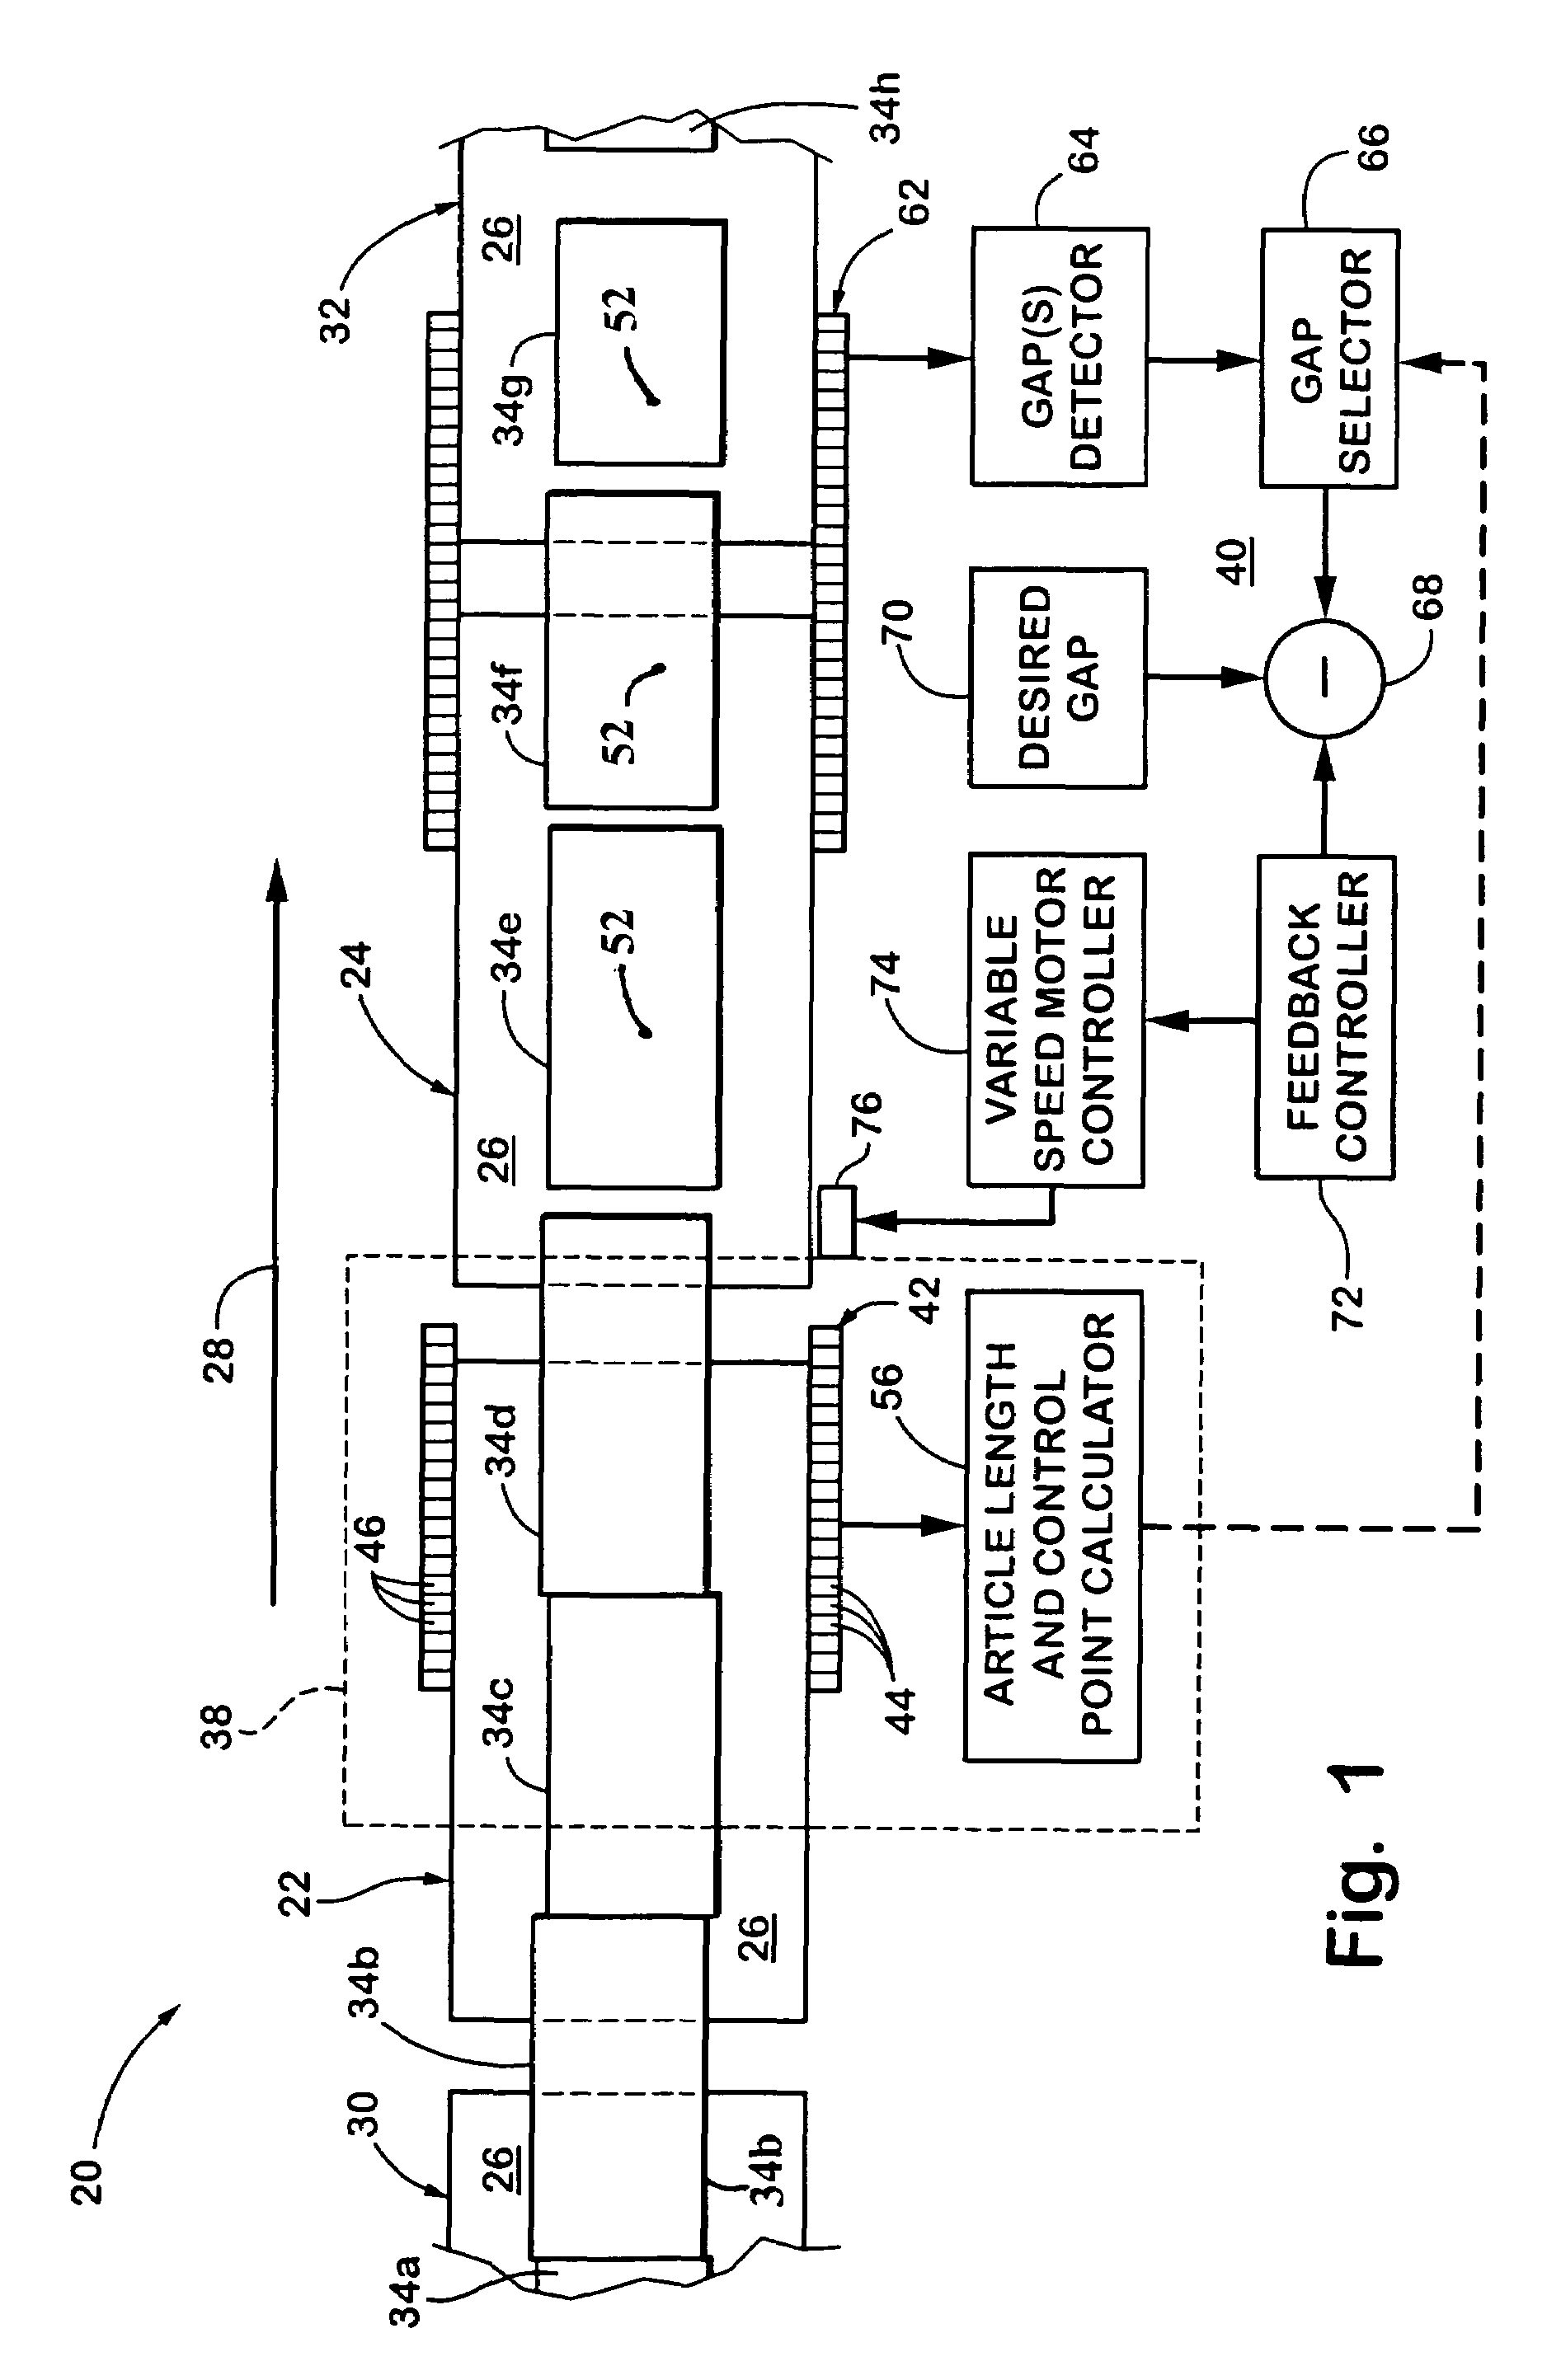 Conveyor induct system